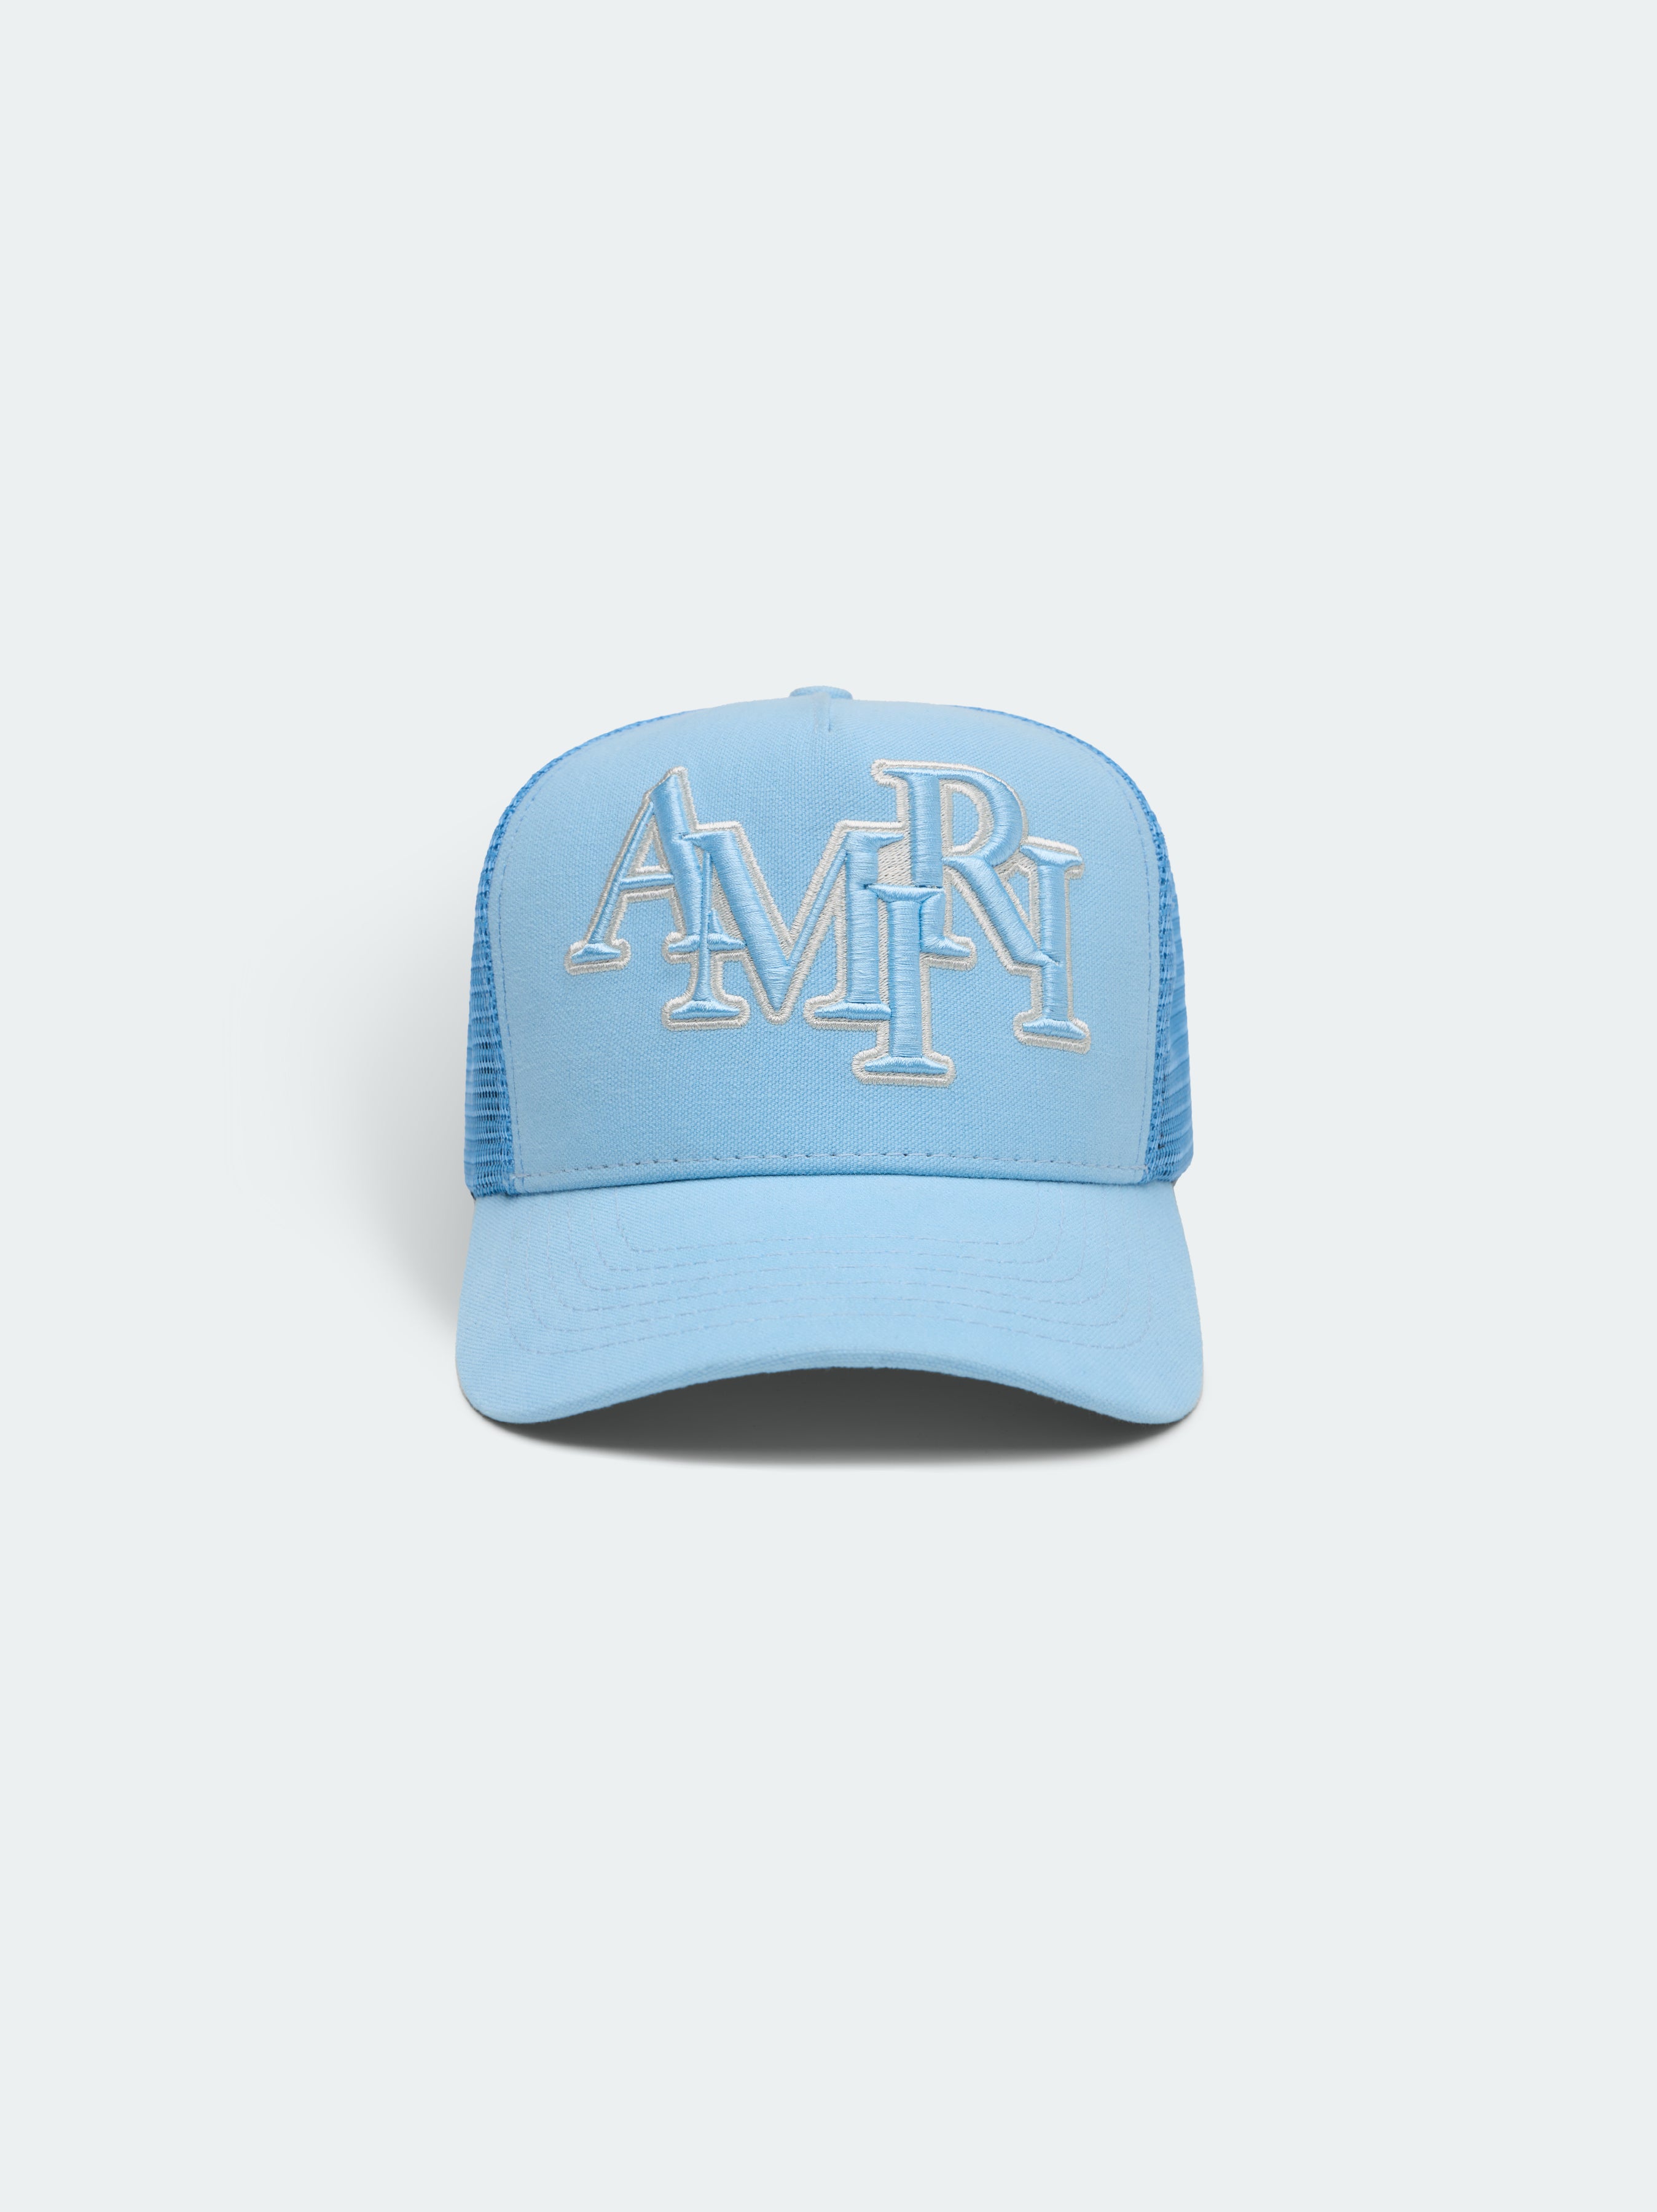 Product STAGGERED AMIRI LOGO TRUCKER - Air Blue featured image